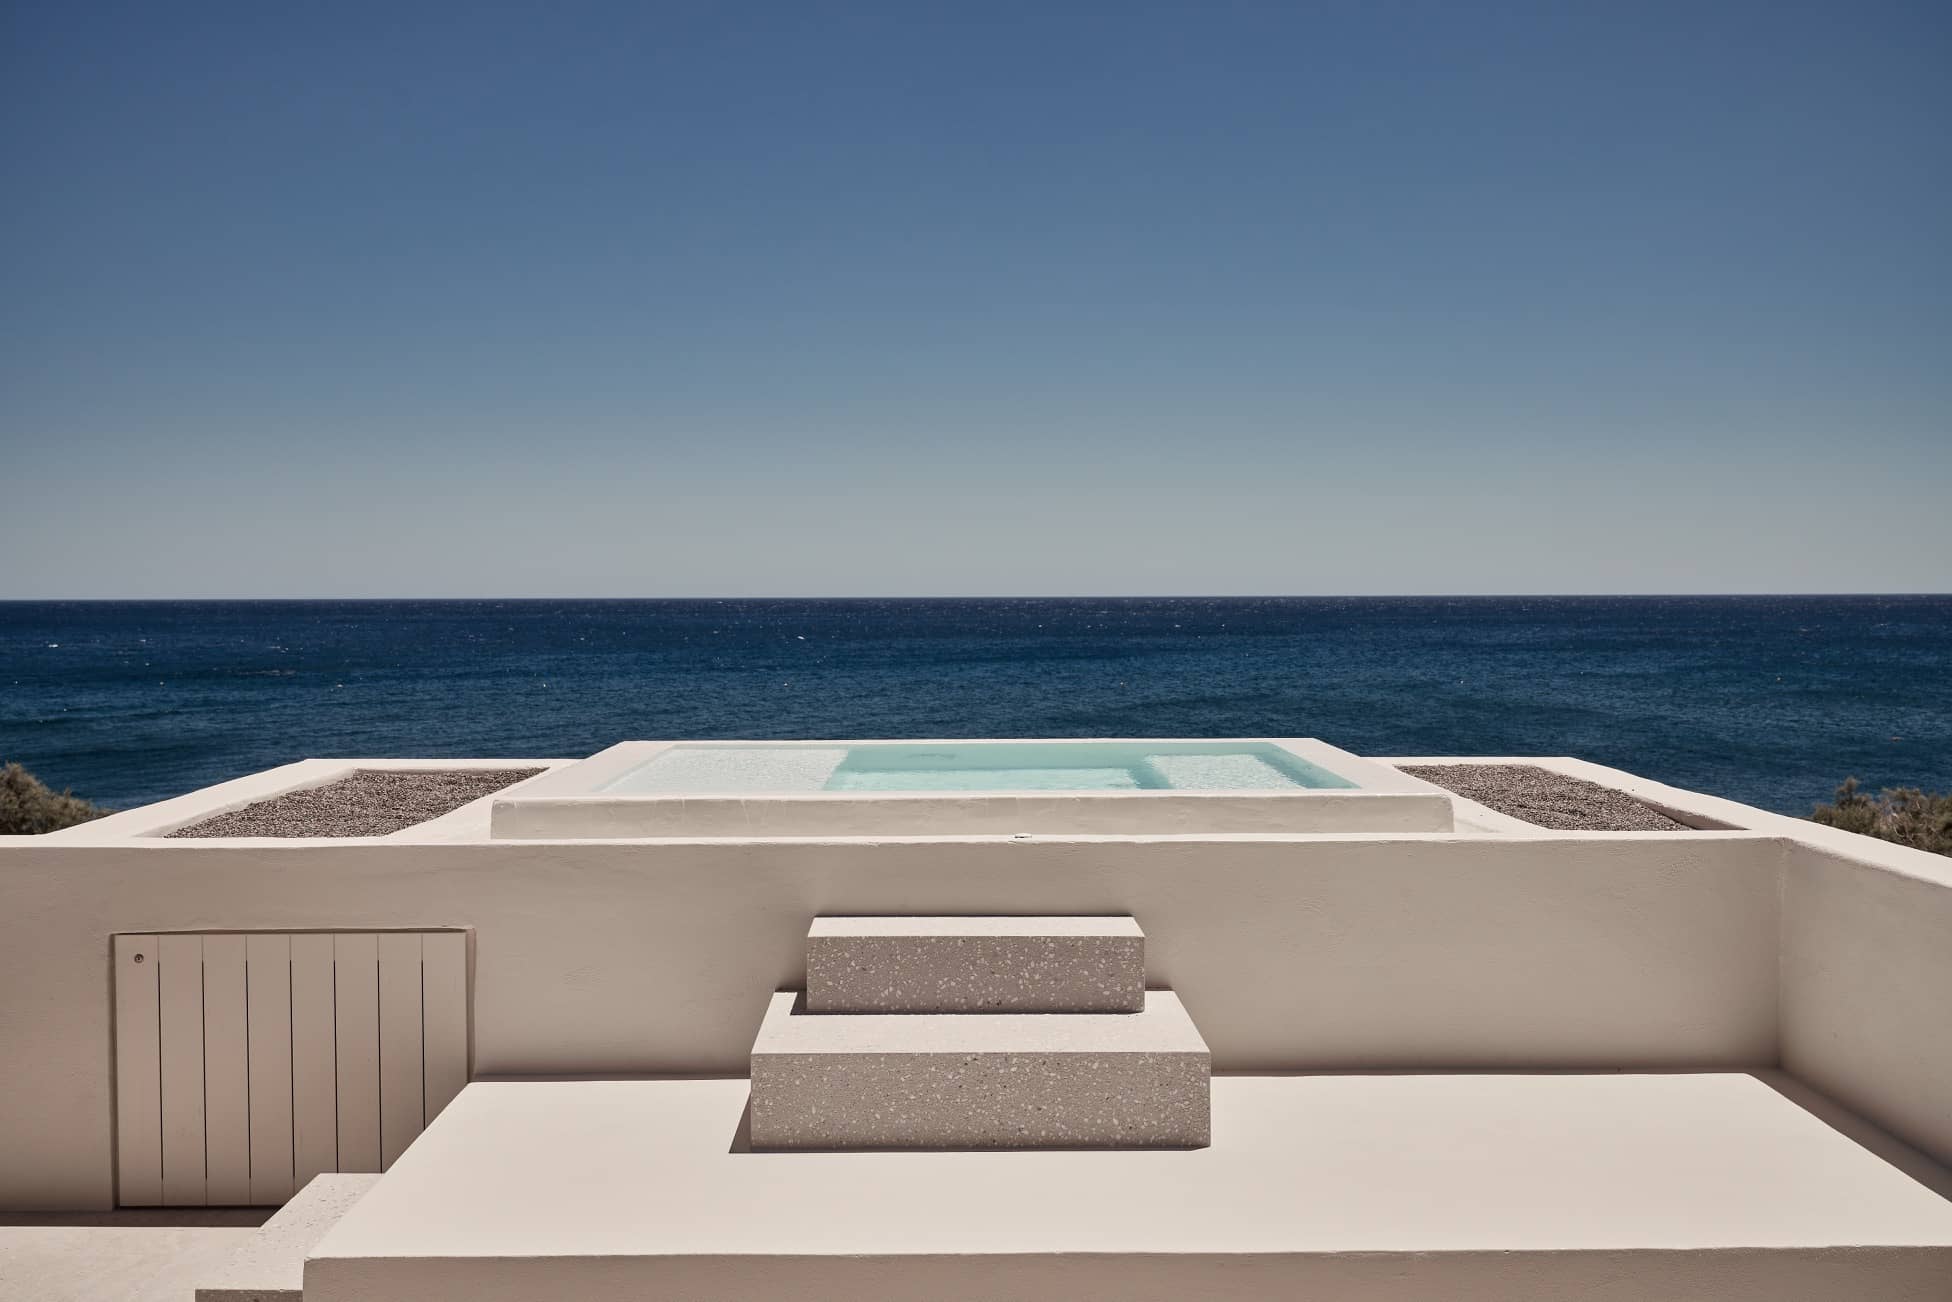 Minimalist rooftop terrace with a rectangular pool overlooking the sea.